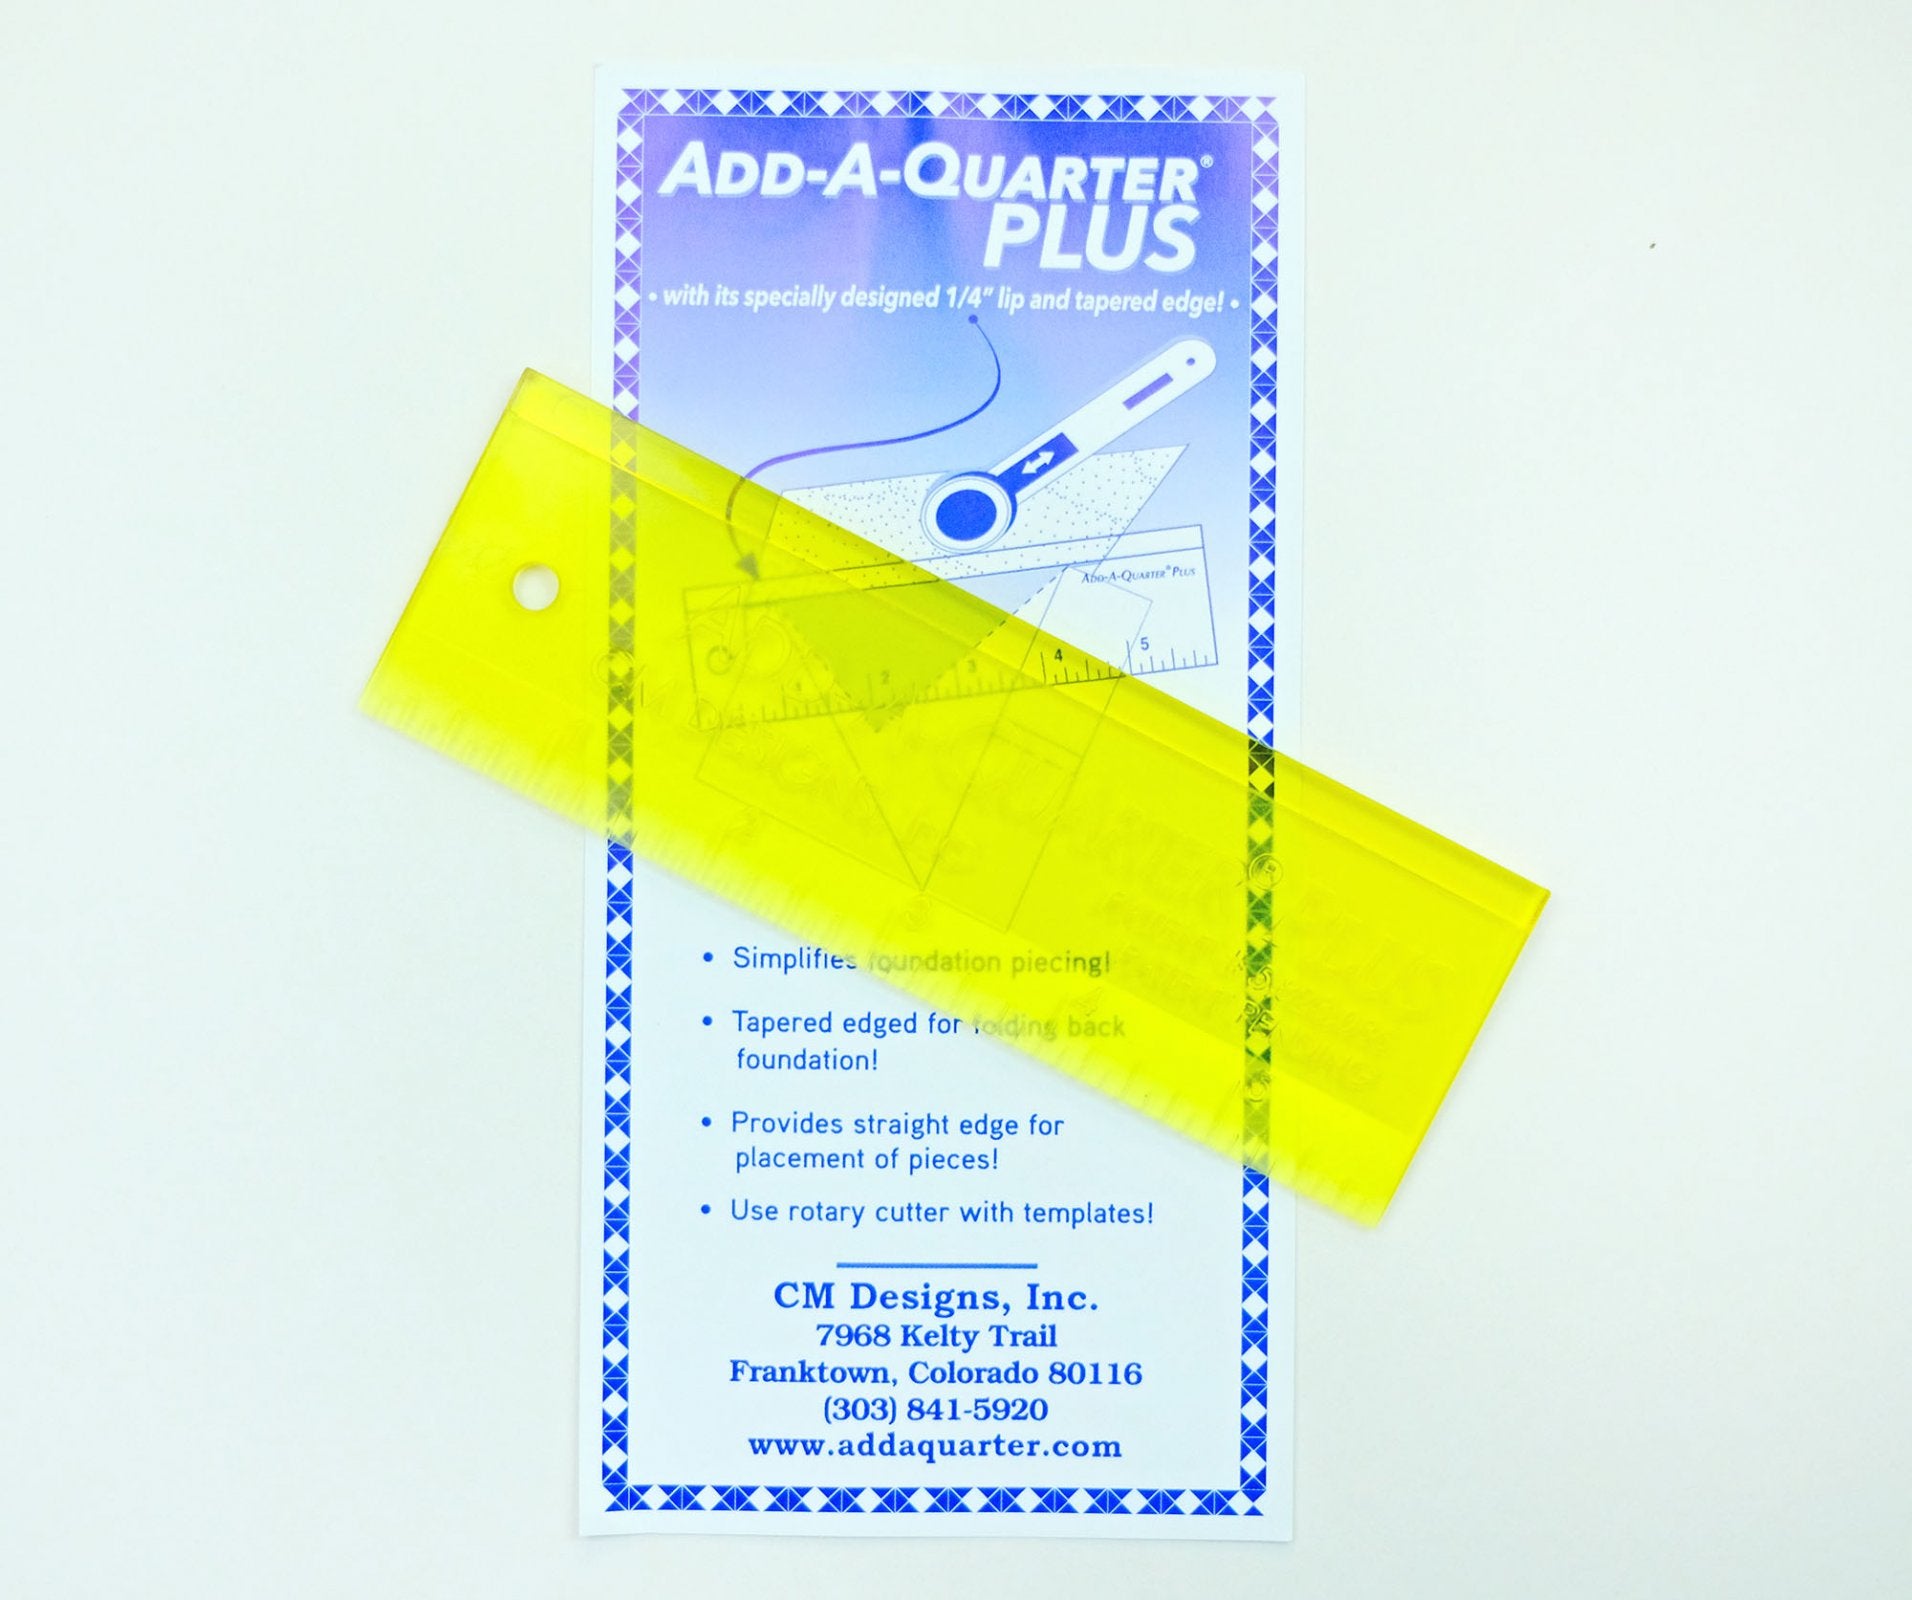 eQuilter Add-A-Quarter - 6 Template Ruler PLUS